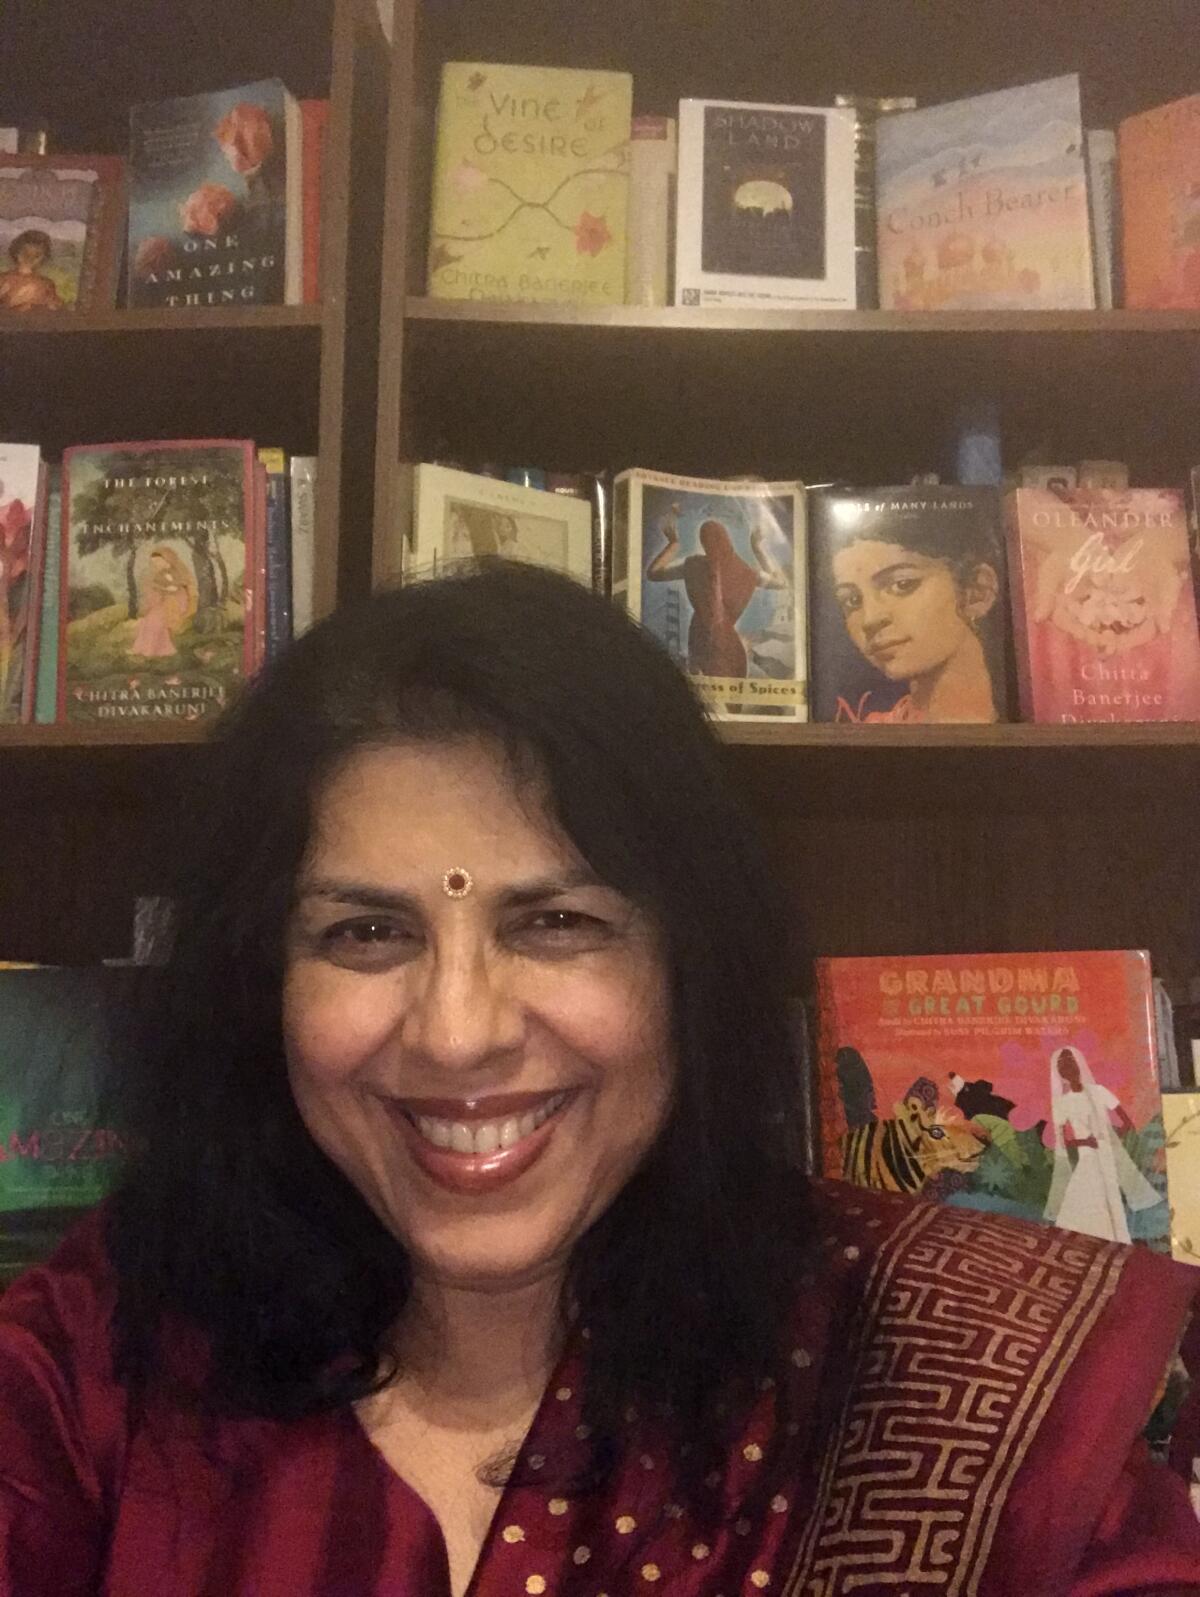 Warwick’s bookstore will present author and activist Chitra Banerjee Divakaruni  on Friday, Oct. 14, in La Jolla.